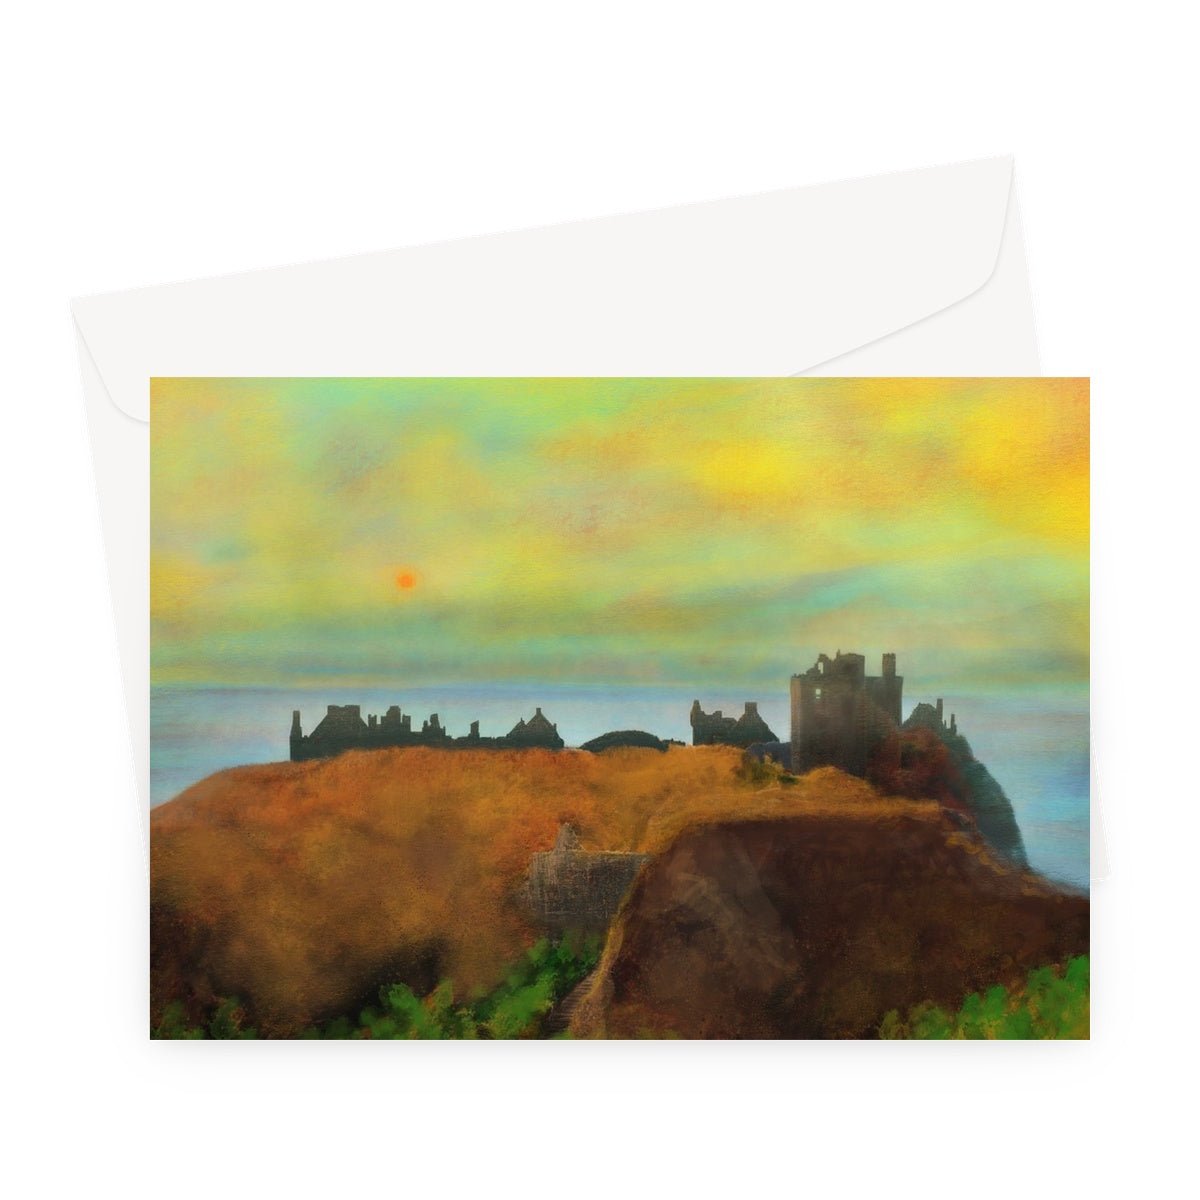 Dunnottar Castle Art Gifts Greeting Card-Greetings Cards-Historic & Iconic Scotland Art Gallery-A5 Landscape-1 Card-Paintings, Prints, Homeware, Art Gifts From Scotland By Scottish Artist Kevin Hunter